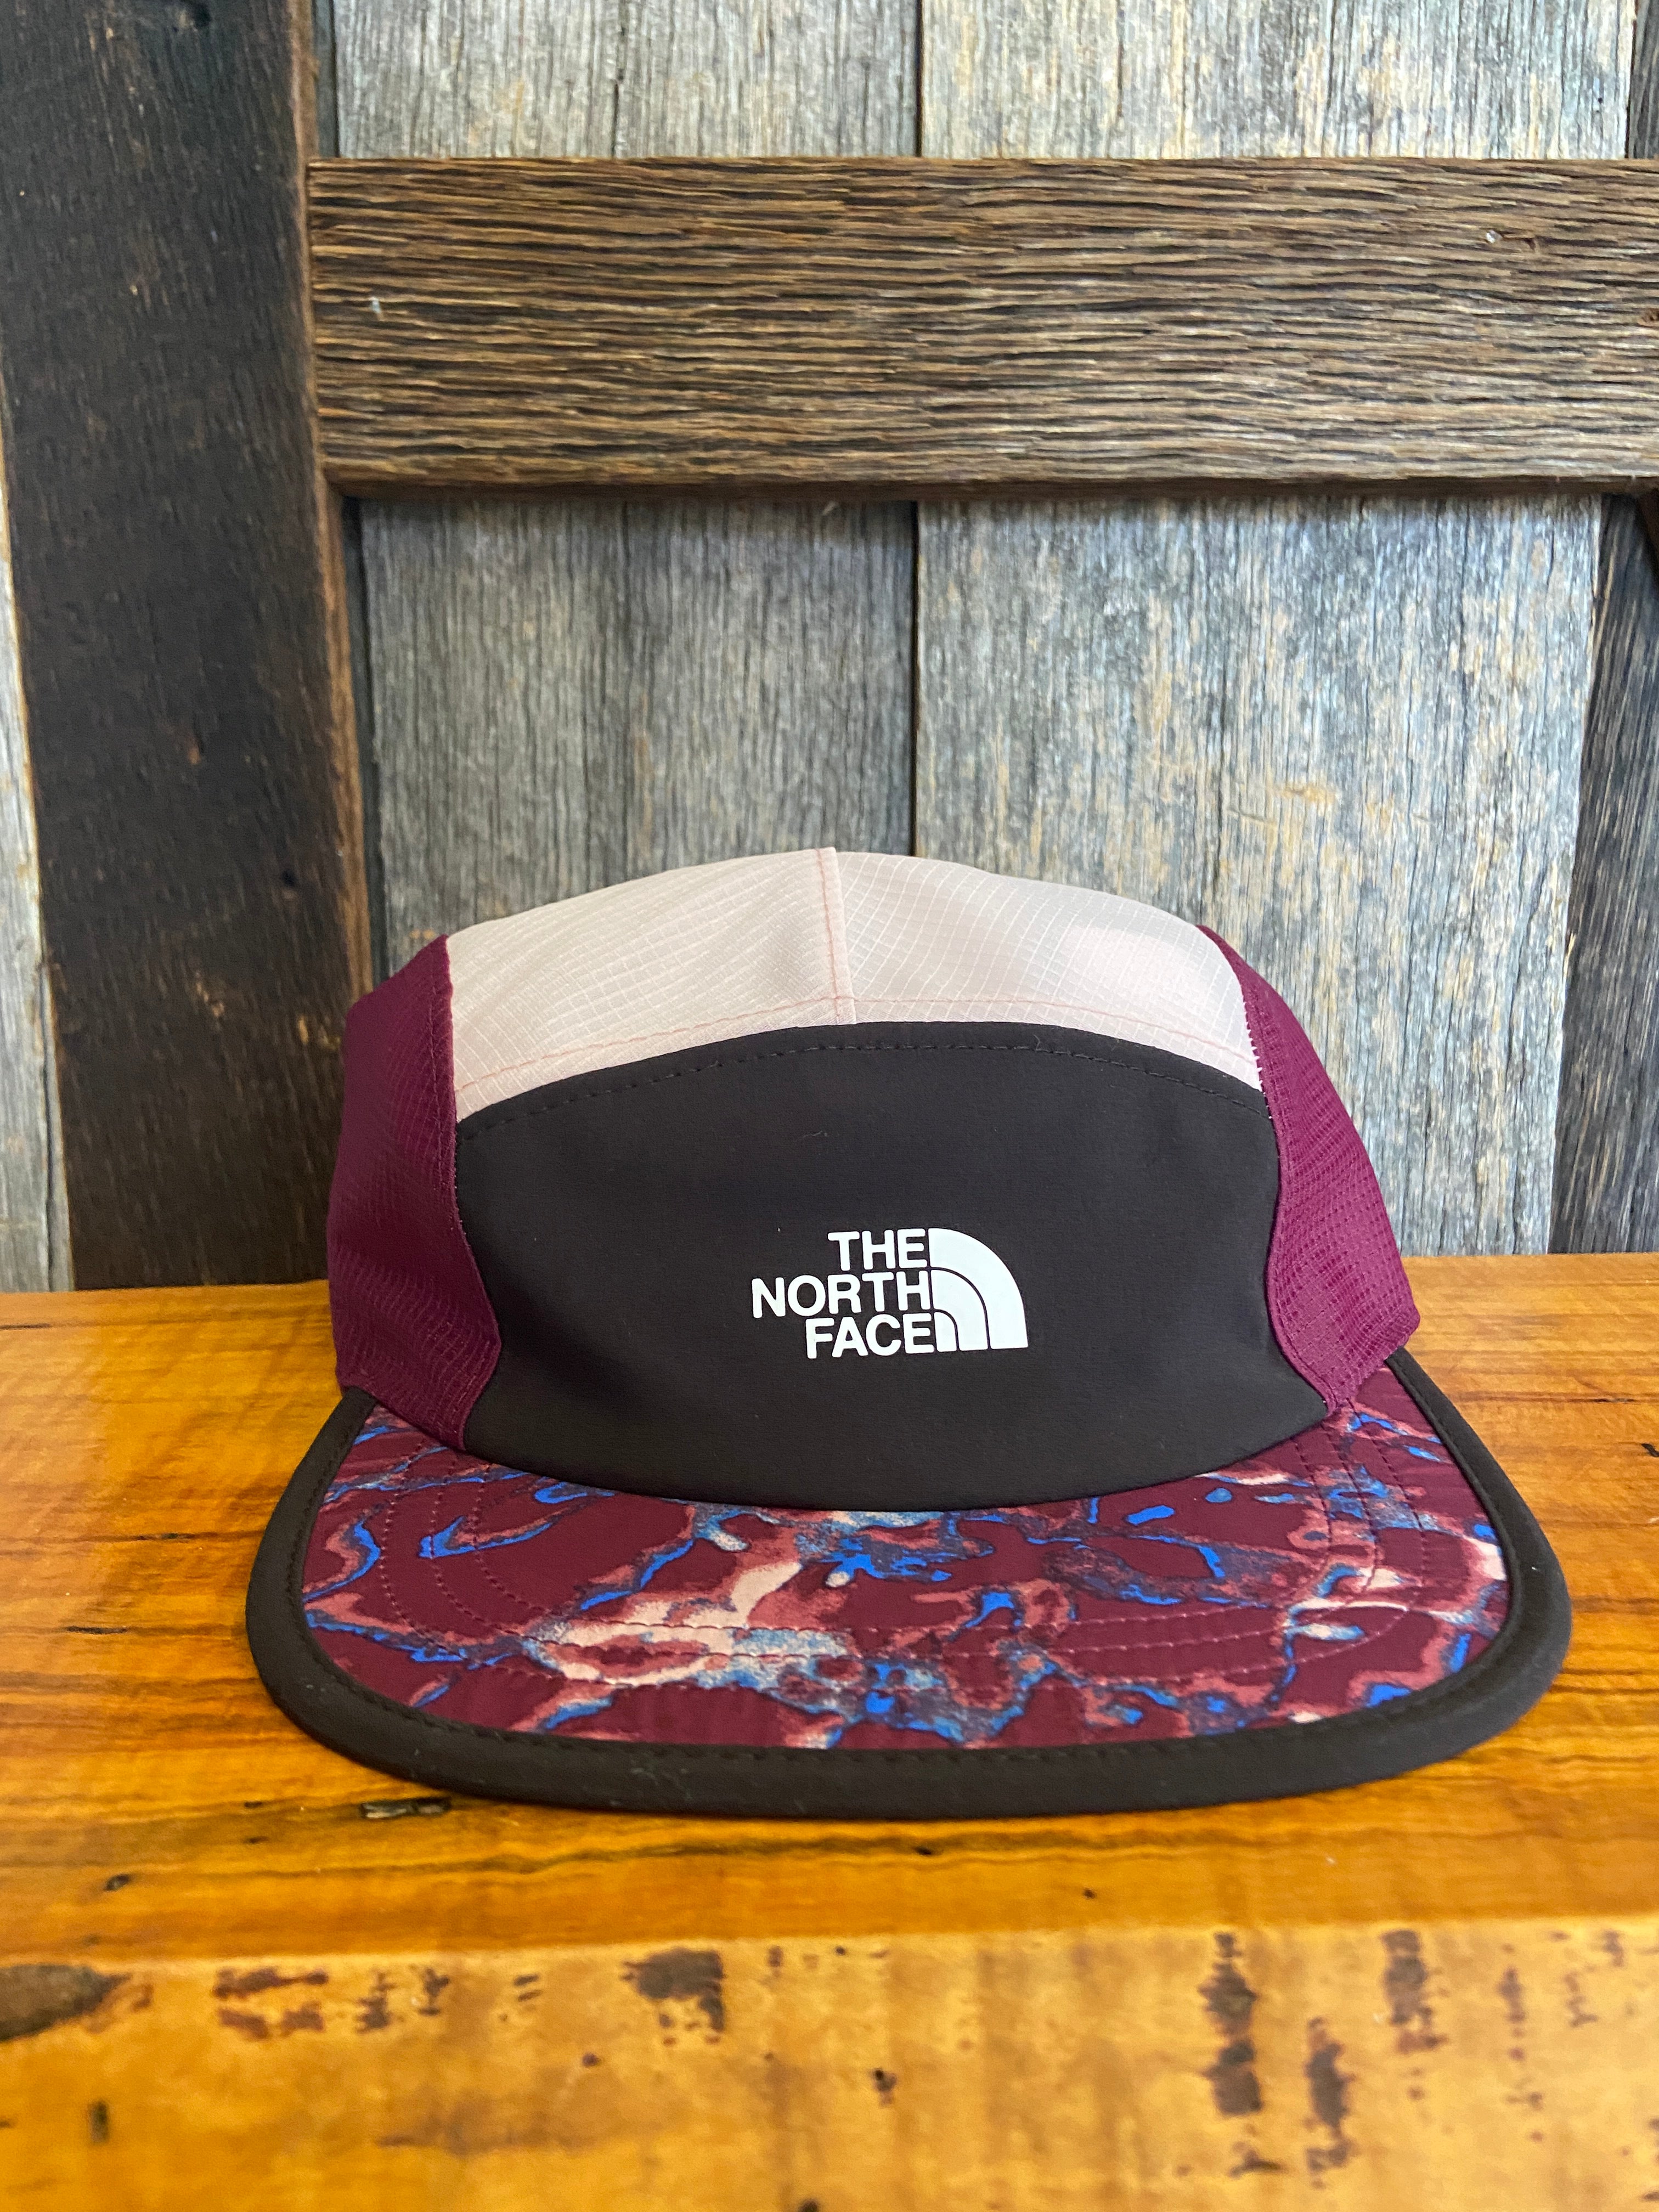 The North Face Run Hat – Ohio Valley Running Company